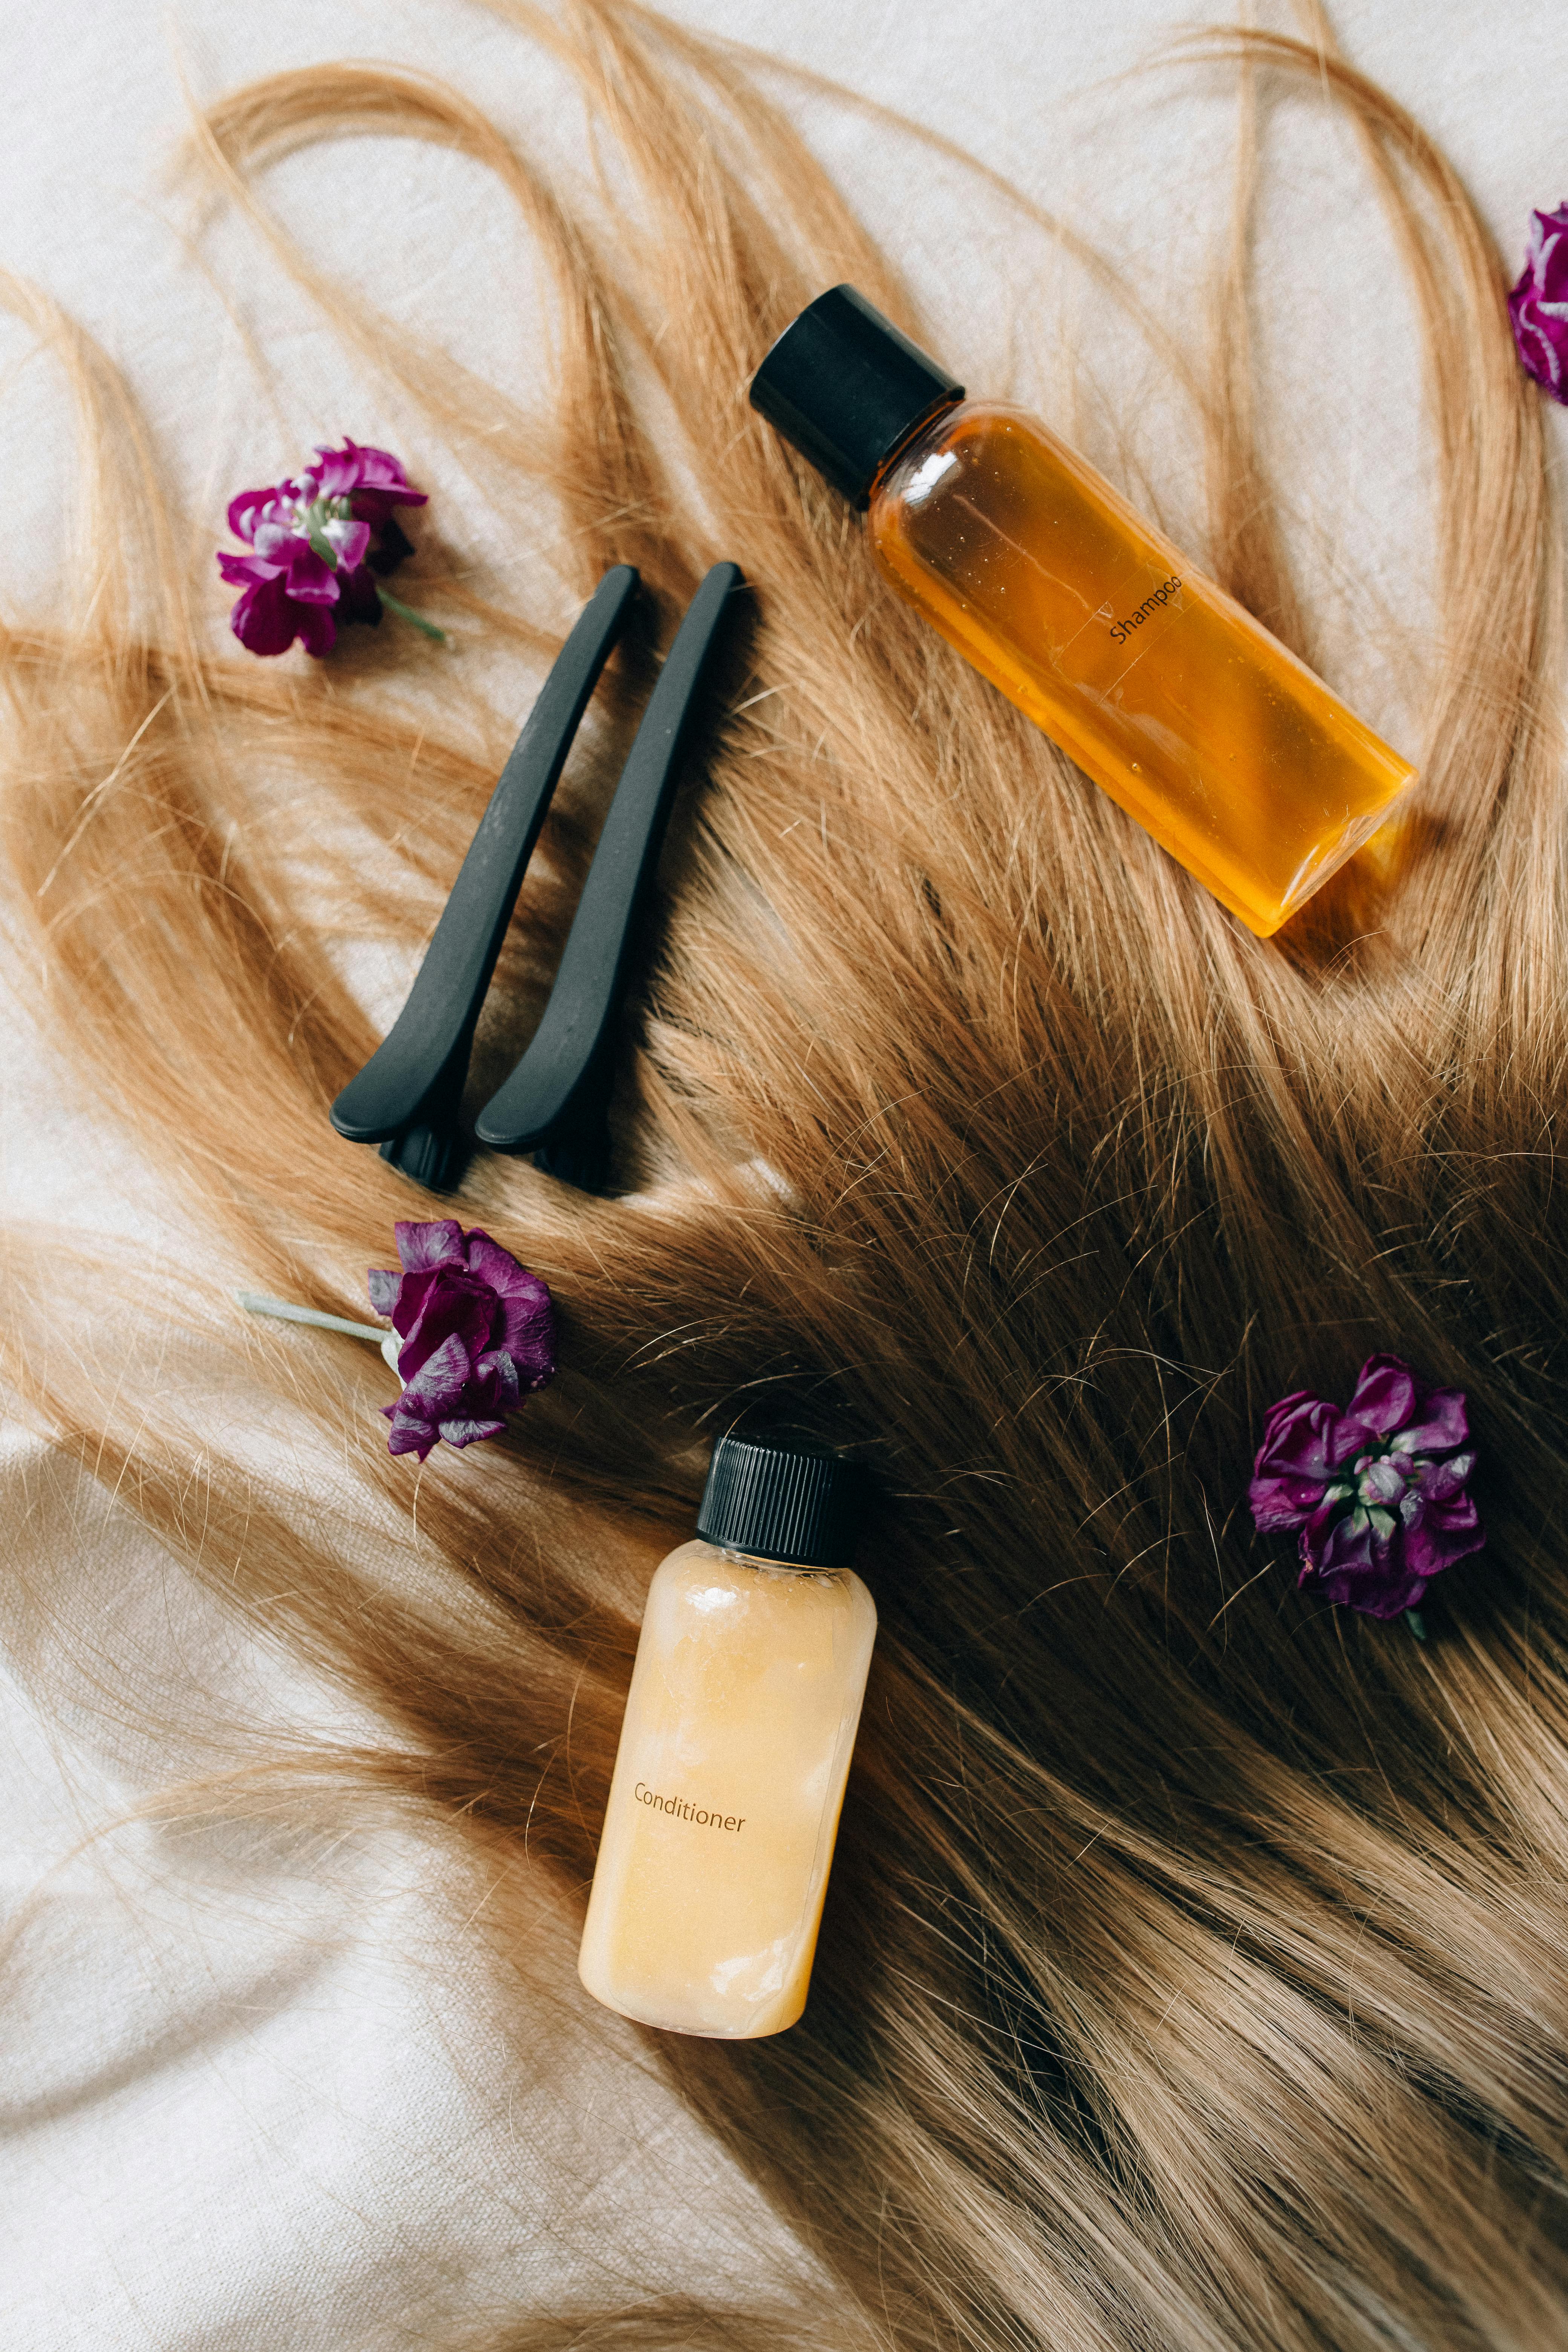 How Does The Function Of Beauty Customized Shampoo Work?